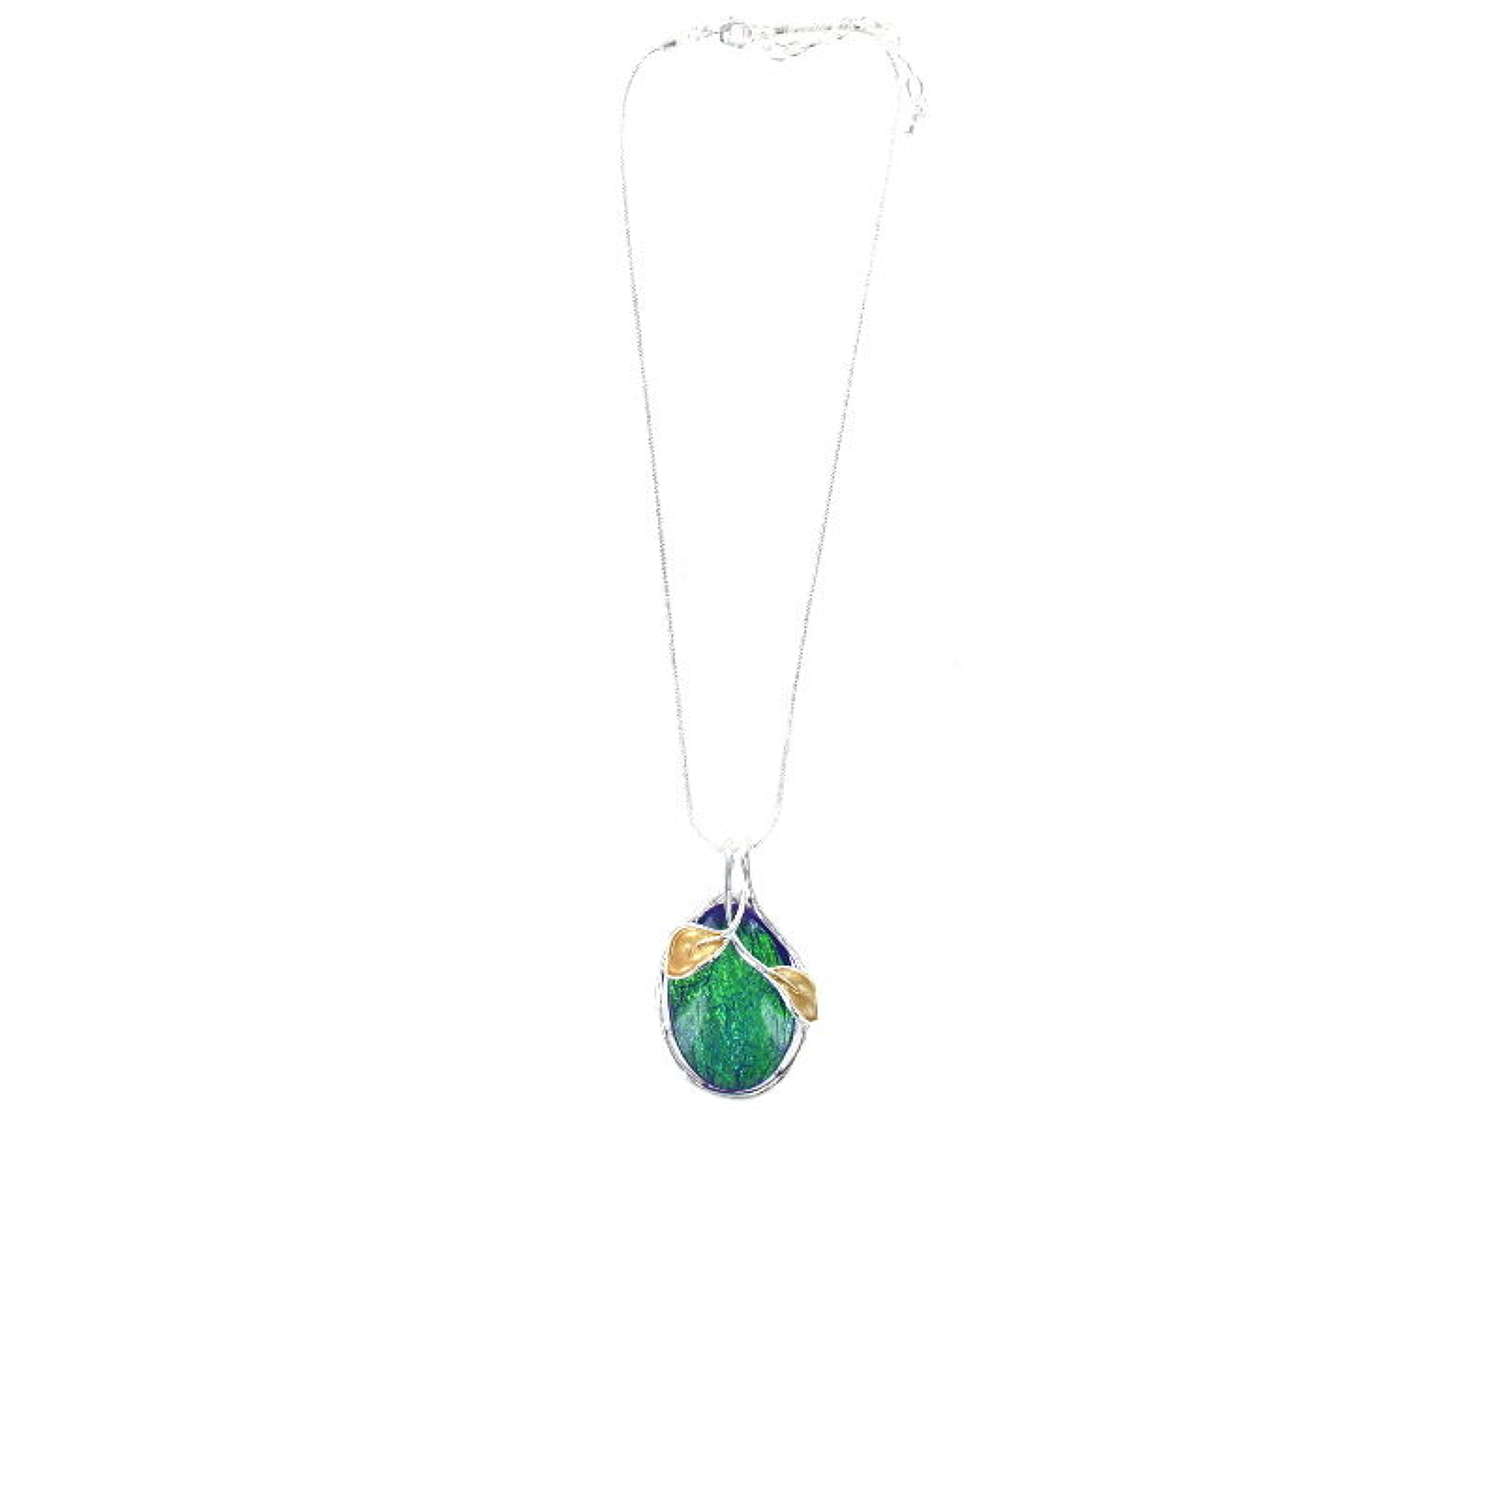 Green pendant necklace on silver tone snake chain.